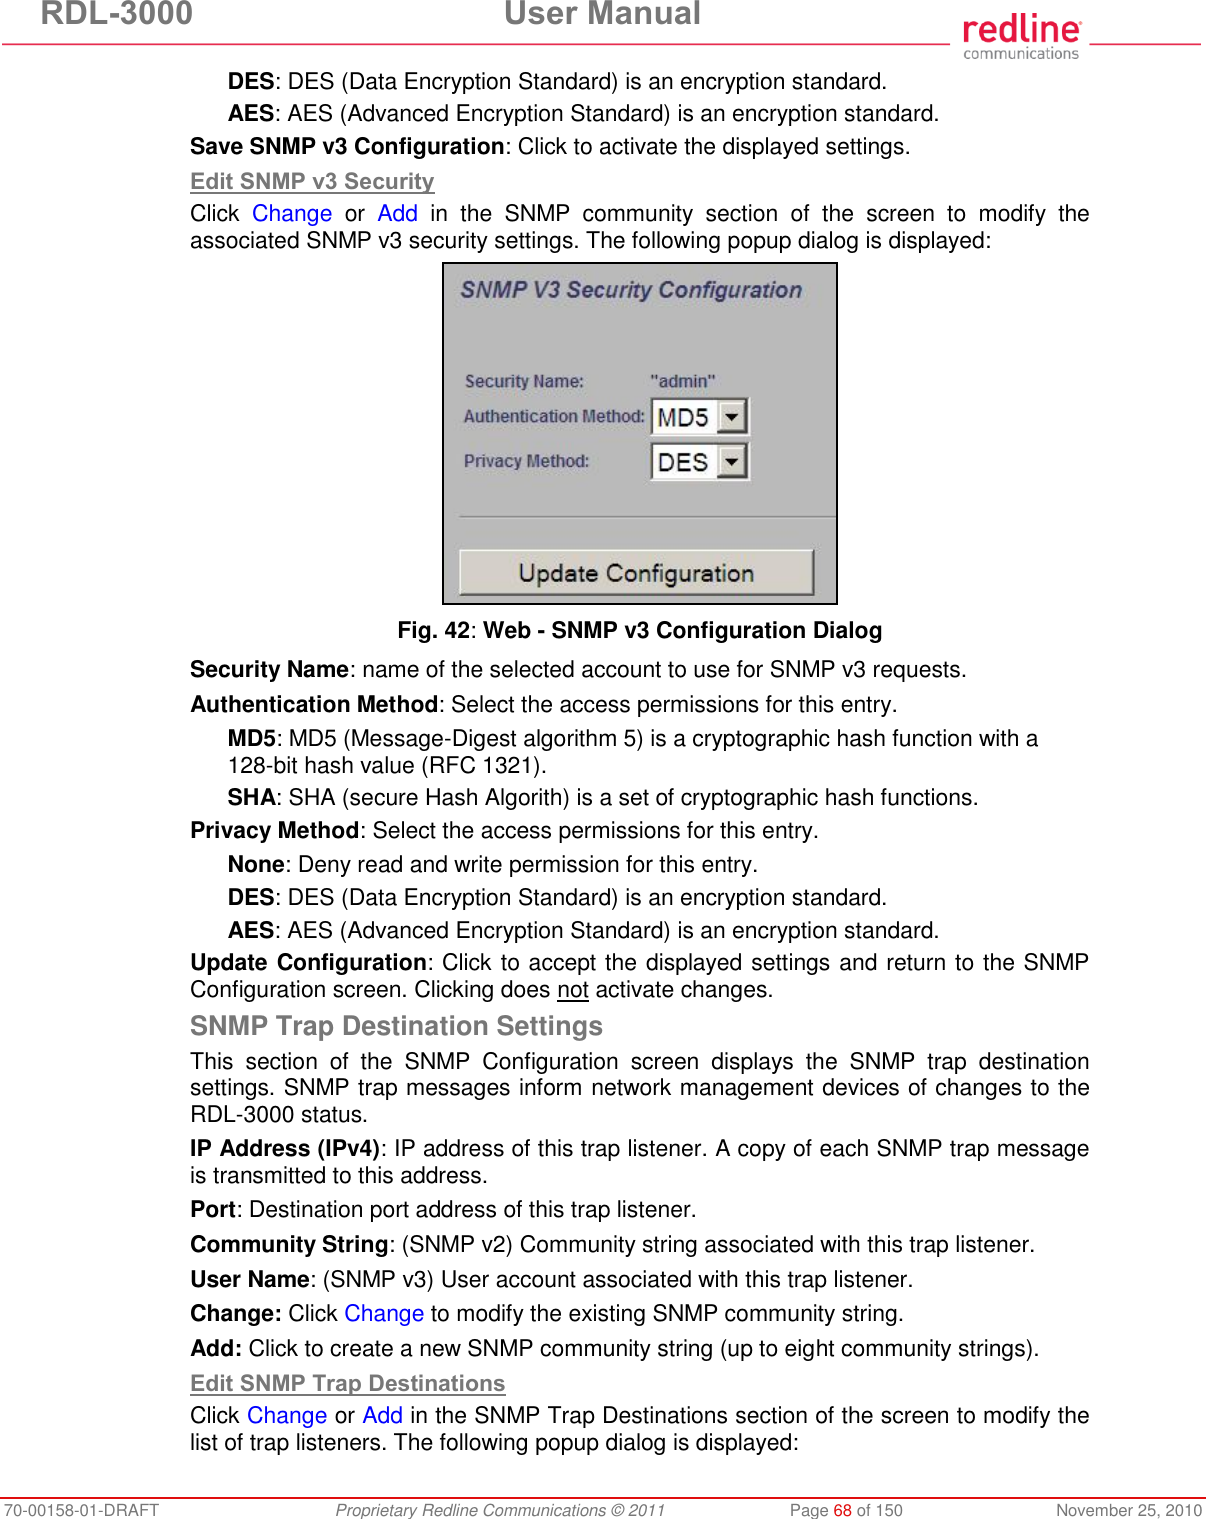 RDL-3000  User Manual 70-00158-01-DRAFT  Proprietary Redline Communications © 2011  Page 68 of 150  November 25, 2010 DES: DES (Data Encryption Standard) is an encryption standard. AES: AES (Advanced Encryption Standard) is an encryption standard. Save SNMP v3 Configuration: Click to activate the displayed settings. Edit SNMP v3 Security Click  Change  or  Add  in  the  SNMP  community  section  of  the  screen  to  modify  the associated SNMP v3 security settings. The following popup dialog is displayed:  Fig. 42: Web - SNMP v3 Configuration Dialog Security Name: name of the selected account to use for SNMP v3 requests. Authentication Method: Select the access permissions for this entry. MD5: MD5 (Message-Digest algorithm 5) is a cryptographic hash function with a 128-bit hash value (RFC 1321). SHA: SHA (secure Hash Algorith) is a set of cryptographic hash functions. Privacy Method: Select the access permissions for this entry. None: Deny read and write permission for this entry. DES: DES (Data Encryption Standard) is an encryption standard. AES: AES (Advanced Encryption Standard) is an encryption standard. Update Configuration: Click to accept the displayed settings and return to the SNMP Configuration screen. Clicking does not activate changes. SNMP Trap Destination Settings This  section  of  the  SNMP  Configuration  screen  displays  the  SNMP  trap  destination settings. SNMP trap messages inform network management devices of changes to the RDL-3000 status. IP Address (IPv4): IP address of this trap listener. A copy of each SNMP trap message is transmitted to this address. Port: Destination port address of this trap listener. Community String: (SNMP v2) Community string associated with this trap listener. User Name: (SNMP v3) User account associated with this trap listener. Change: Click Change to modify the existing SNMP community string. Add: Click to create a new SNMP community string (up to eight community strings). Edit SNMP Trap Destinations Click Change or Add in the SNMP Trap Destinations section of the screen to modify the list of trap listeners. The following popup dialog is displayed: 